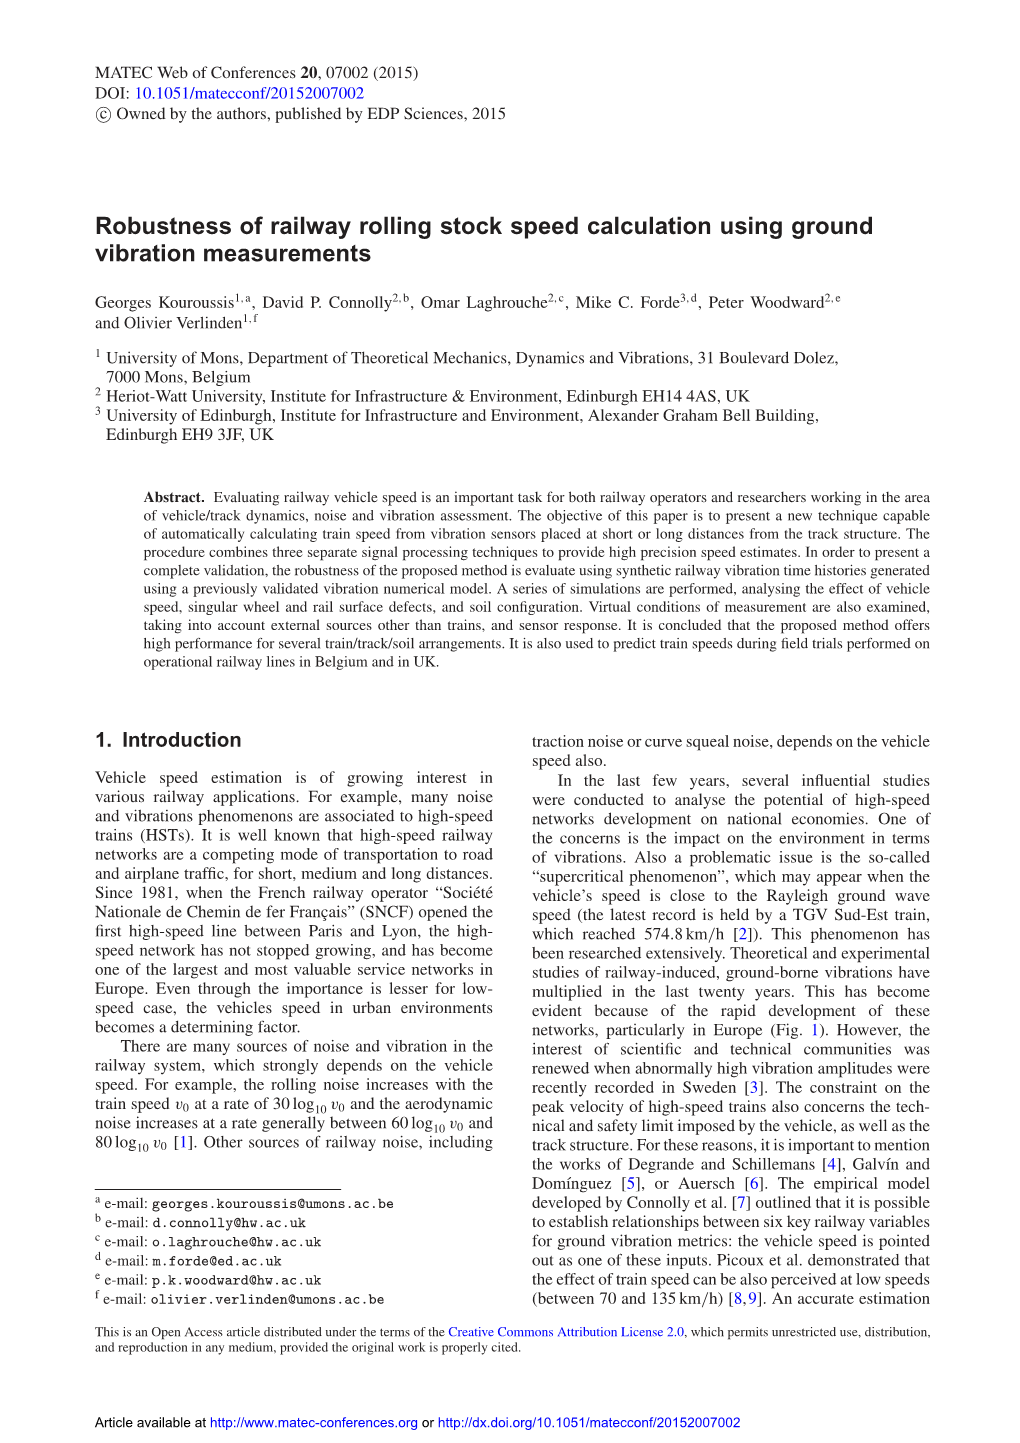 Robustness of Railway Rolling Stock Speed Calculation Using Ground Vibration Measurements